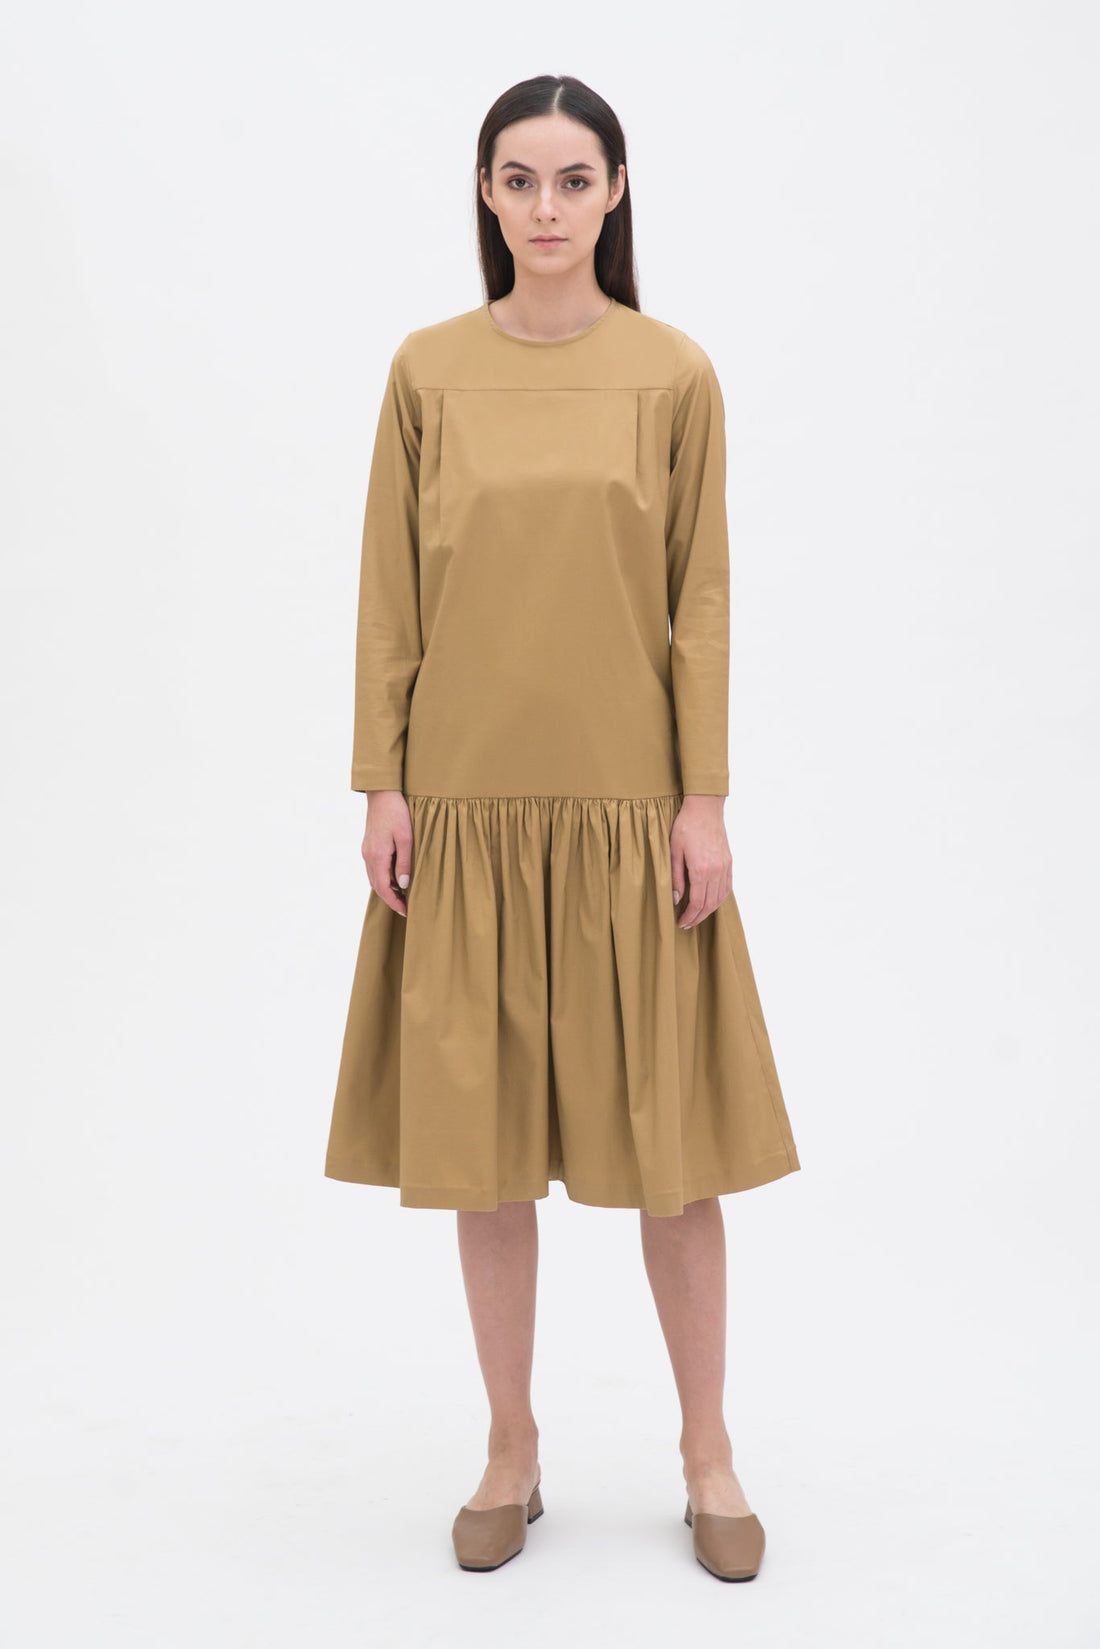 A woman with long brown hair is wearing a drop waist camel dress with ruffle hem. She is also wearing beige leather shoes.